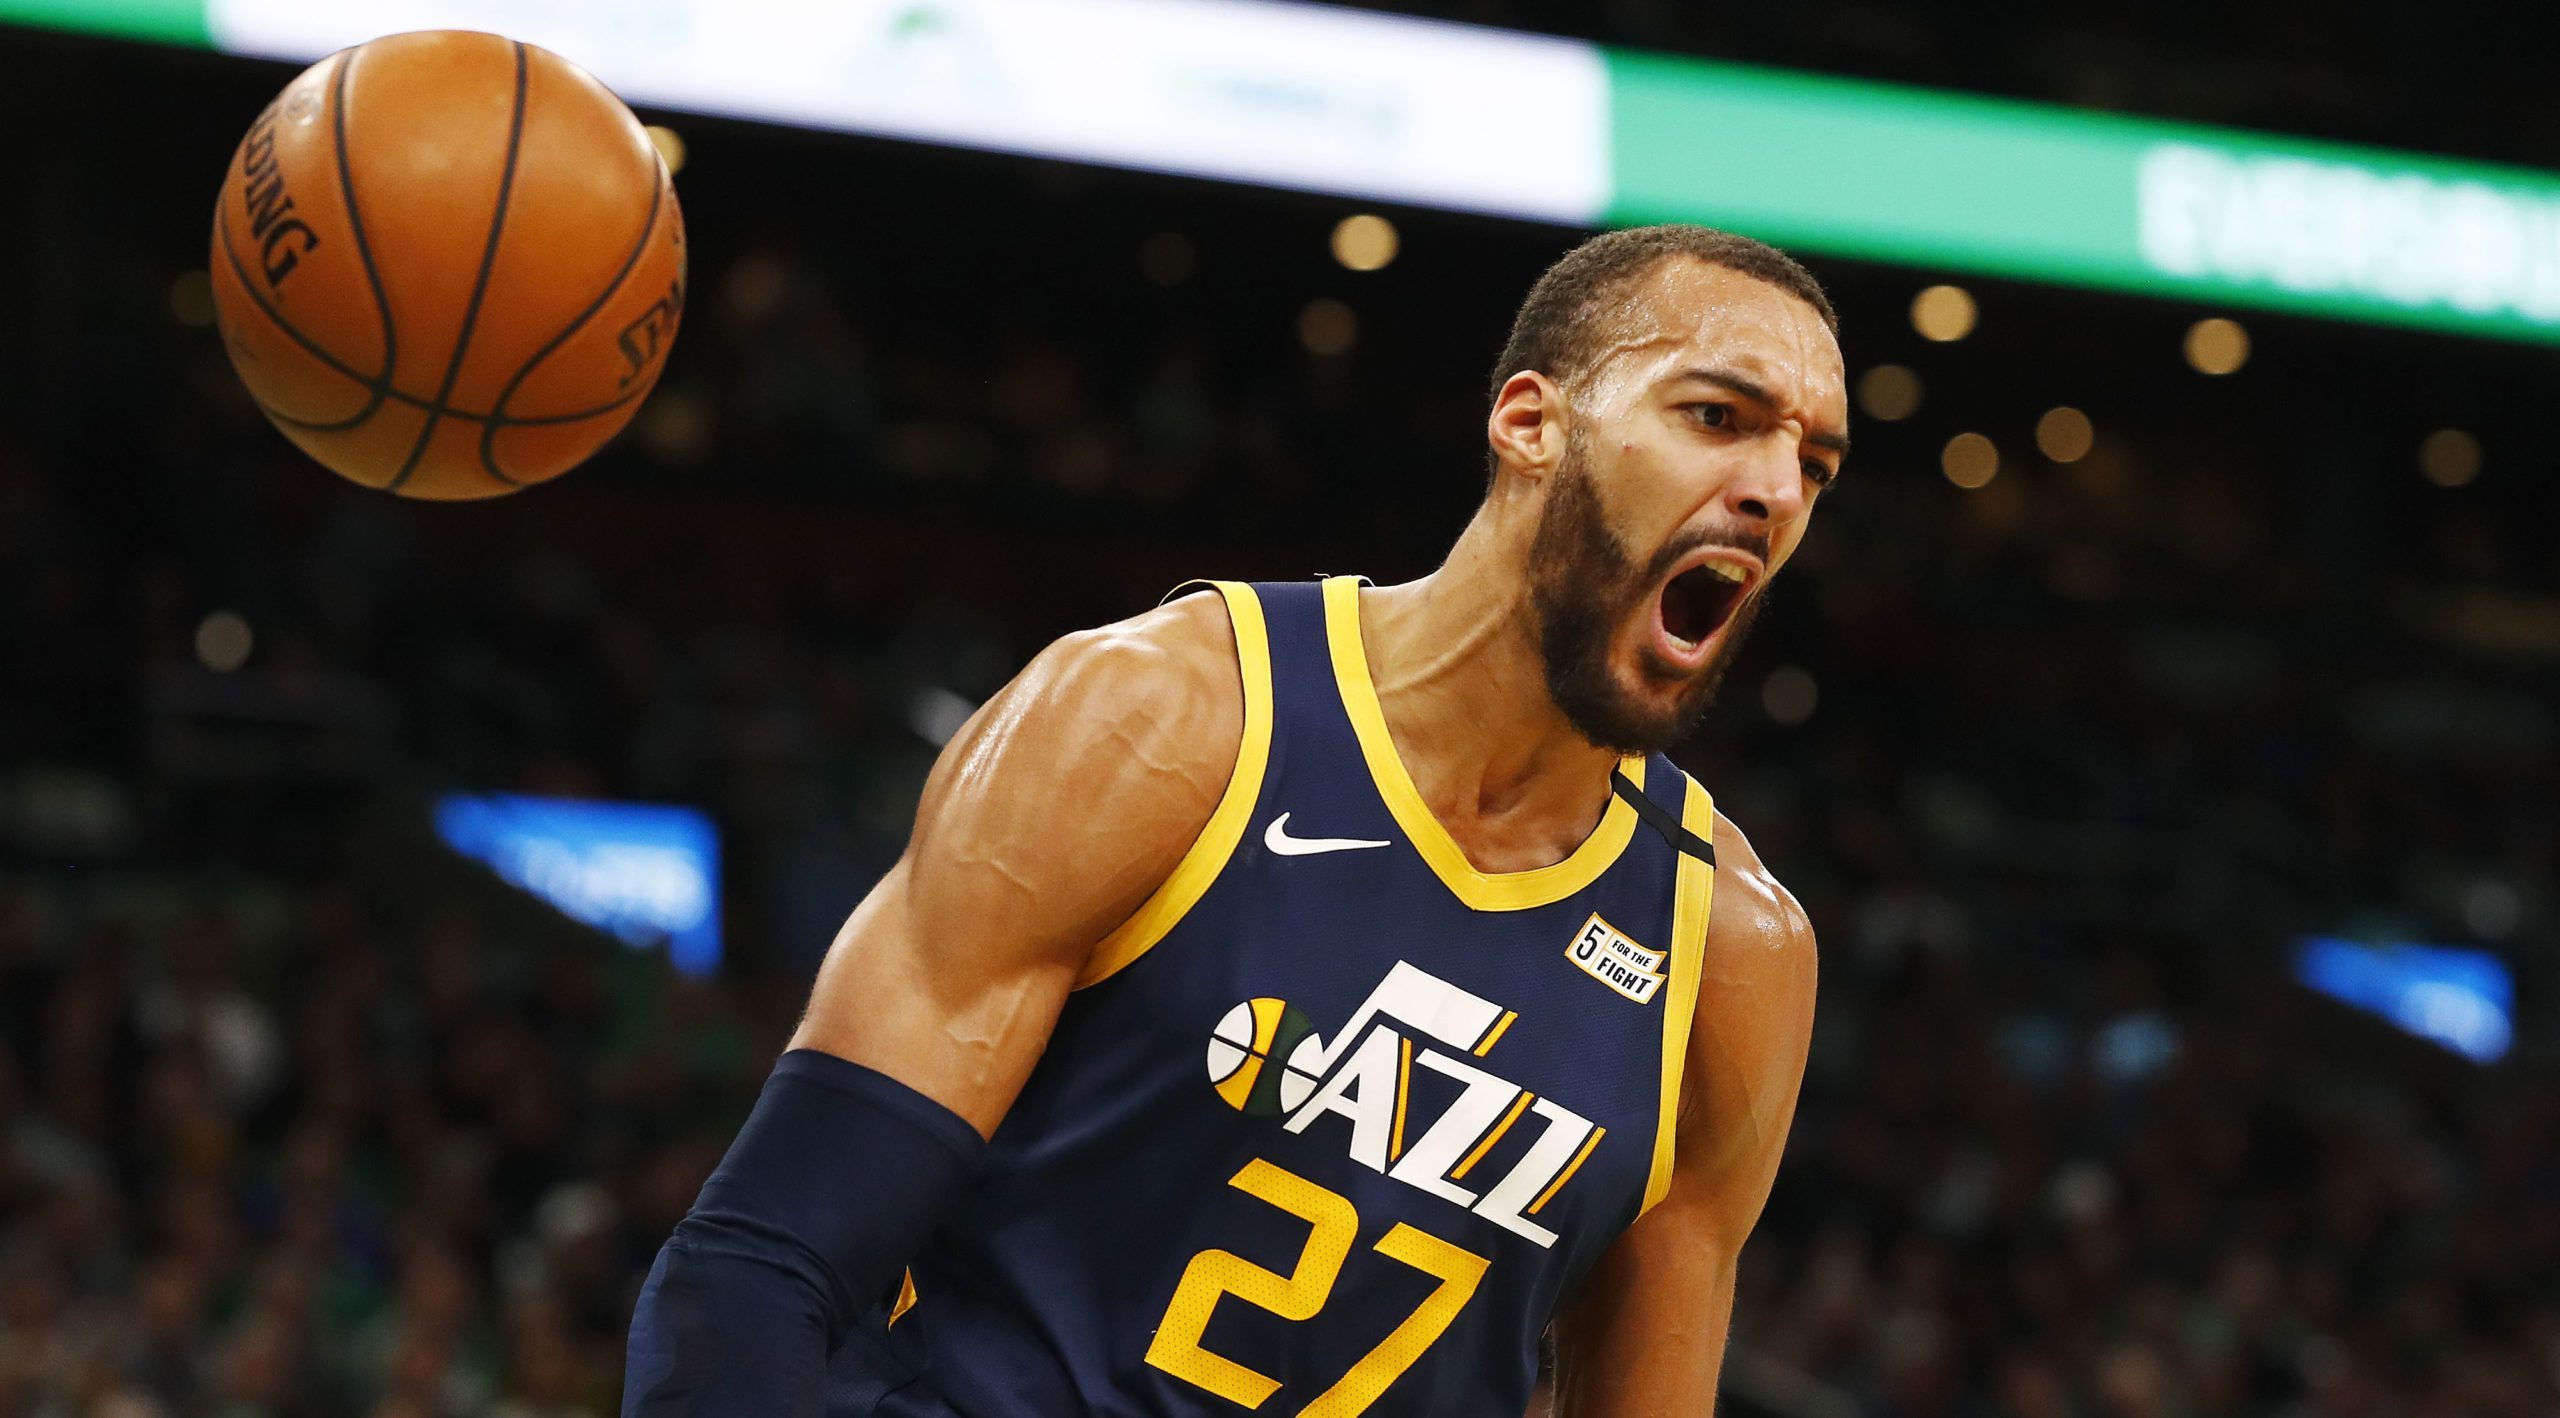 rudy gobert was the first domino that effectively shut down american sports photo afp